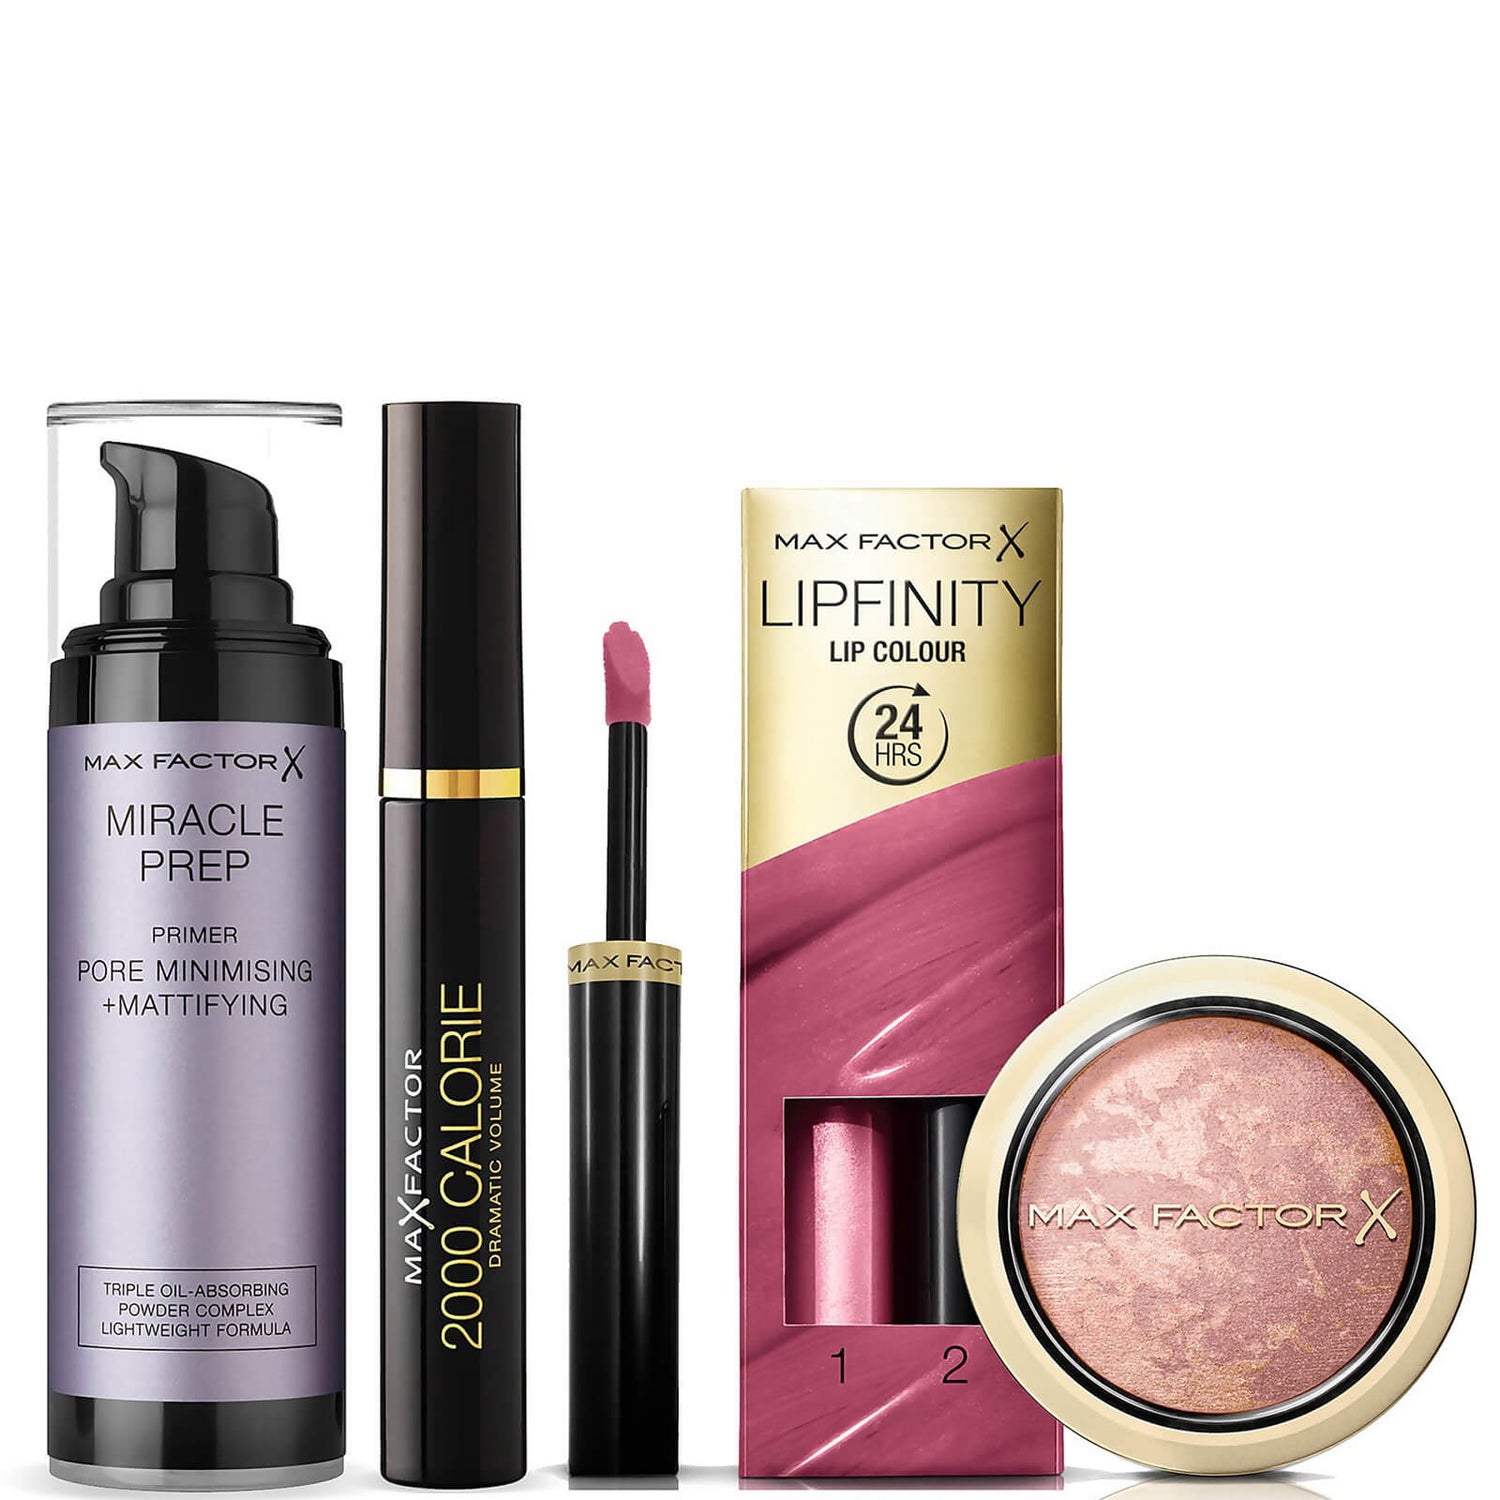 Max Factor Iconic Beauty Bundle (Worth £42.96)